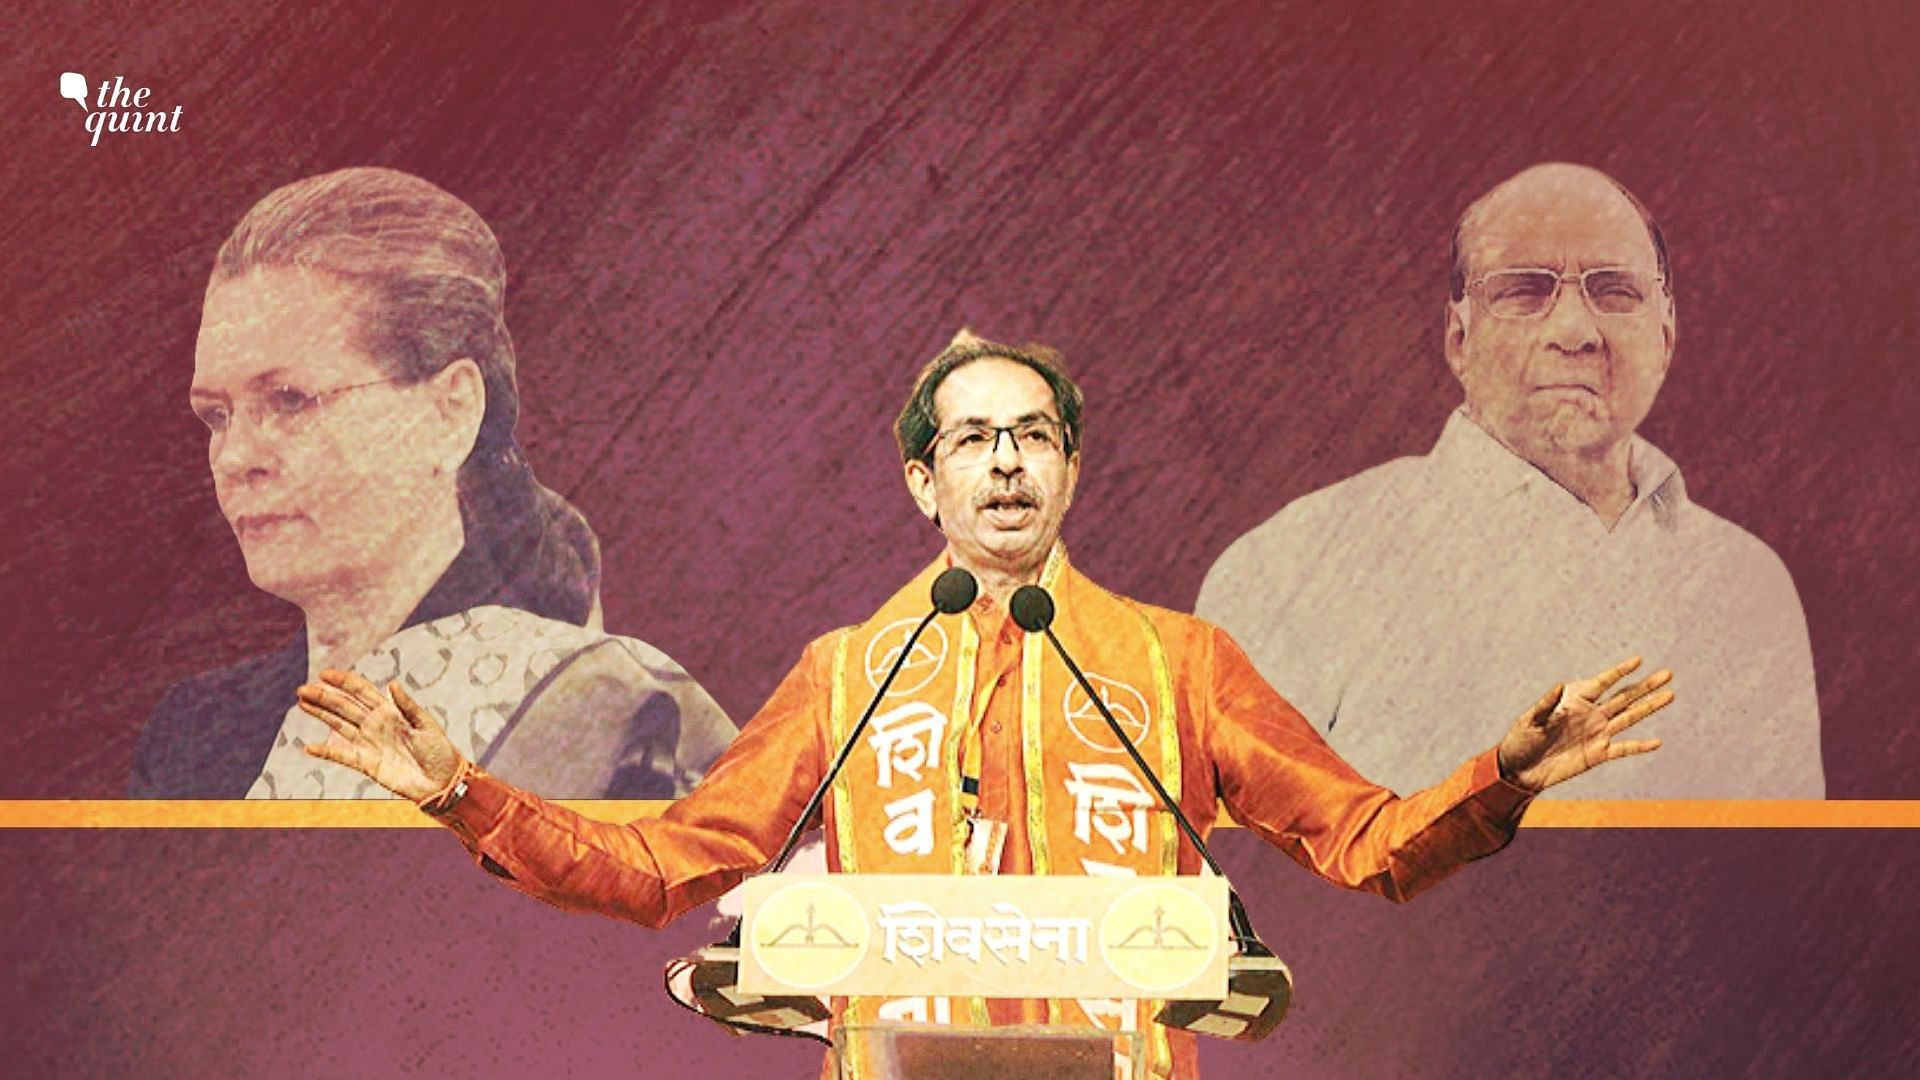 Uddhav Thackeray, 59, will lead the alliance between three bitter rivals - Shiv Sena, Nationalist Congress Party and the Congress.